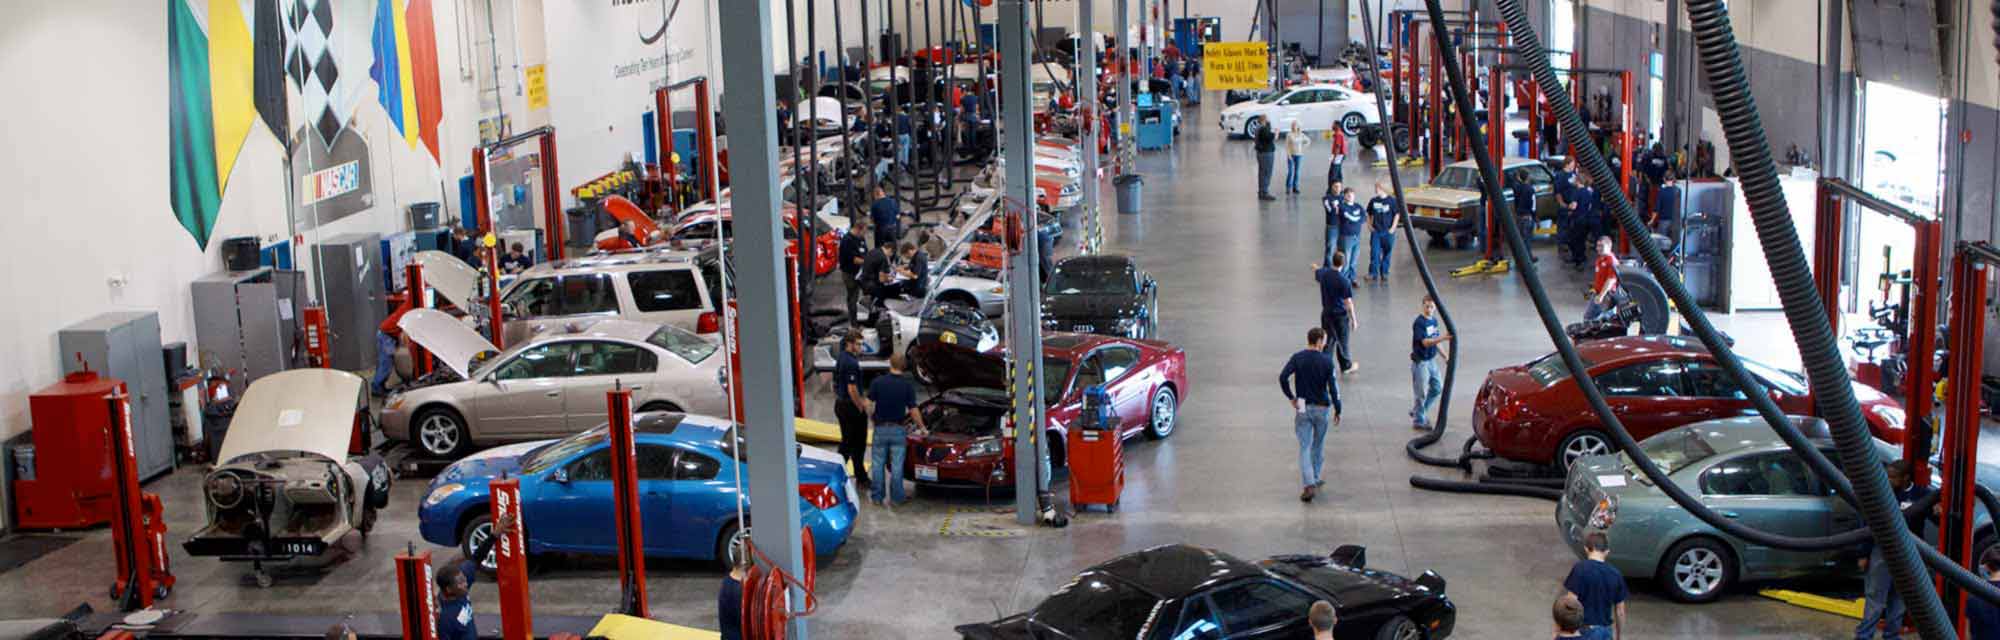 NASCAR-Technical-Institute- interior large garage with cars and people